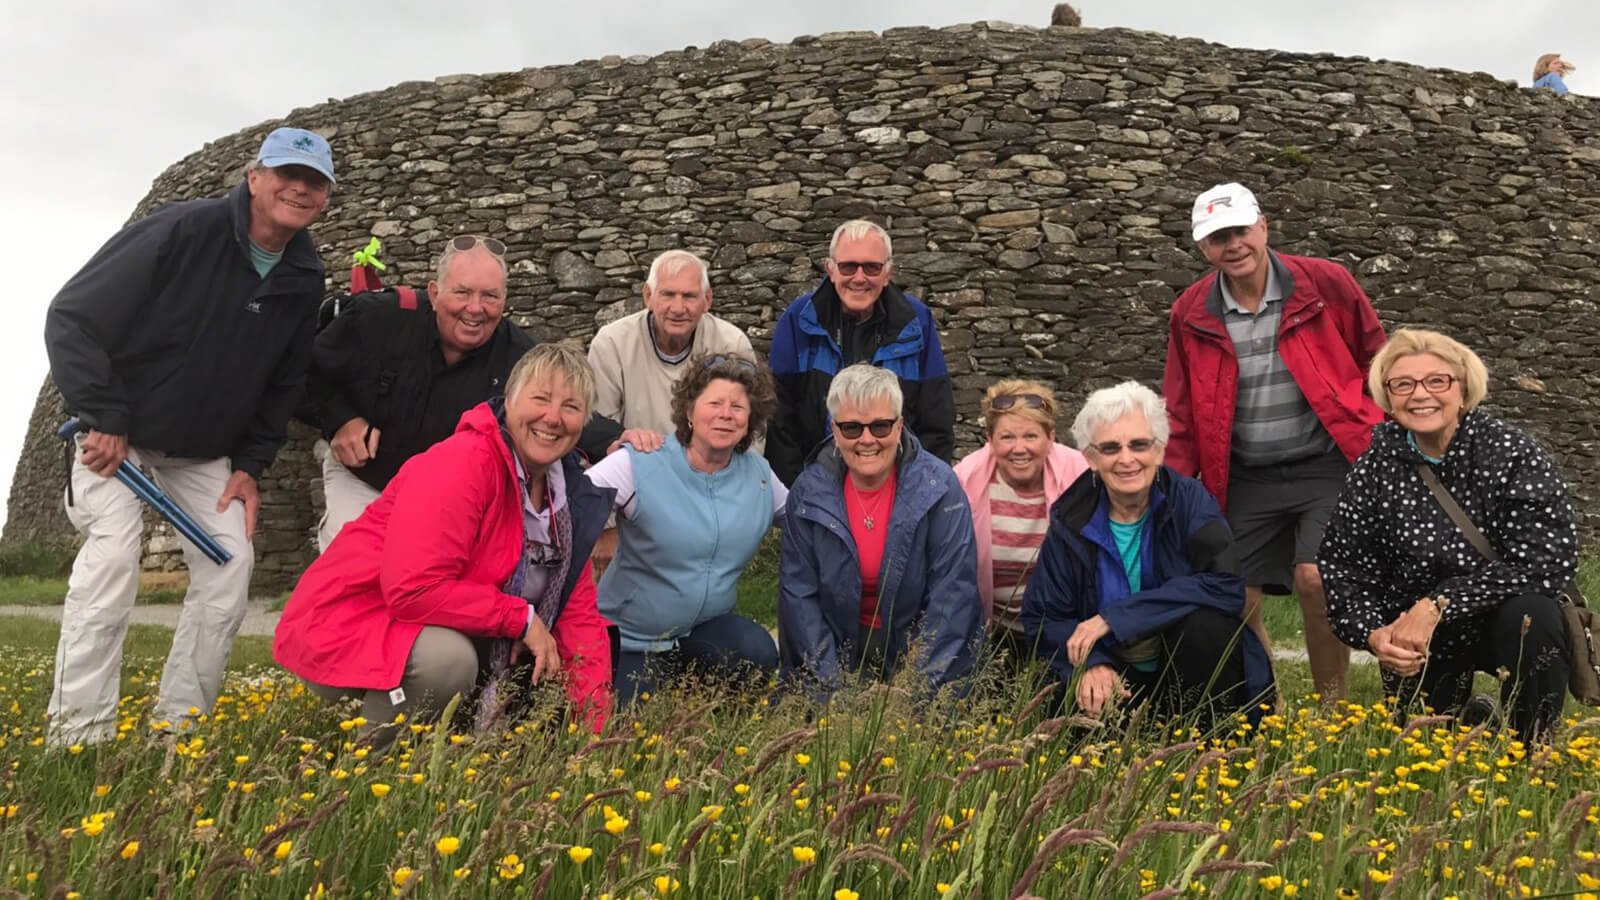 Tour group at Grianan of Aileach in Donegal